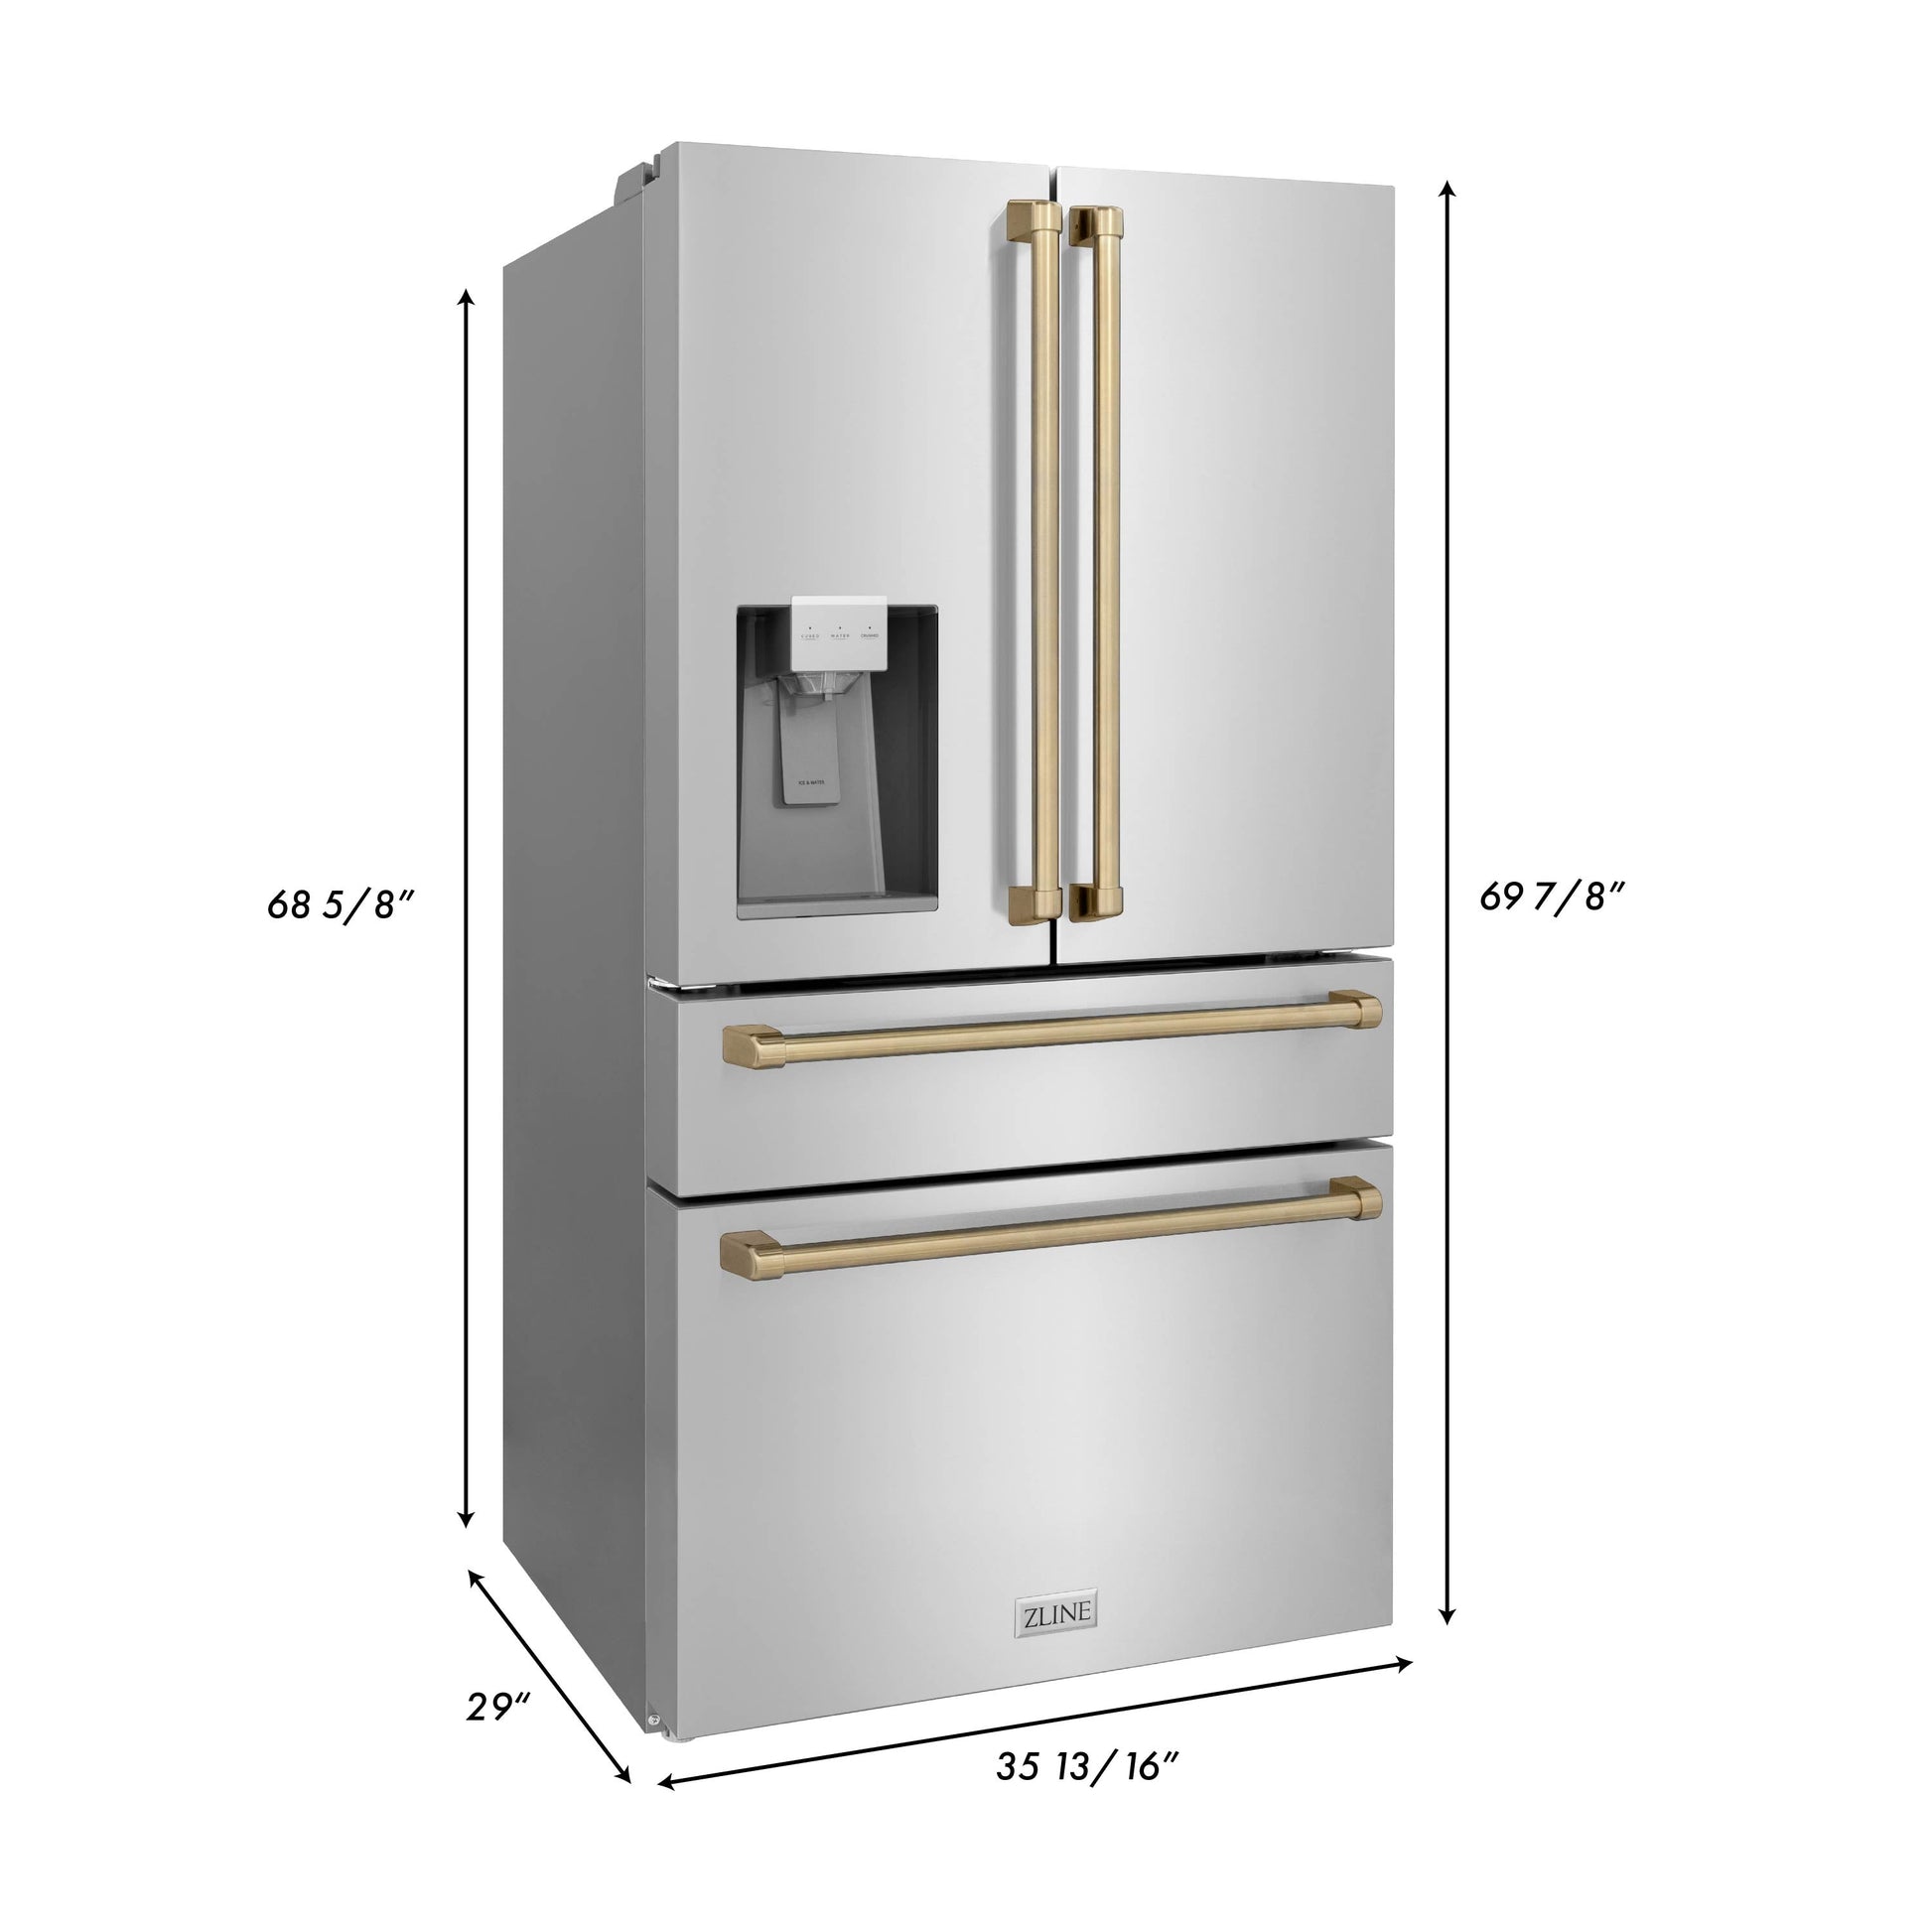 ZLINE 4-Appliance 48" Autograph Edition Kitchen Package with Stainless Steel Dual Fuel Range, Range Hood, Dishwasher, and Refrigeration Including External Water Dispenser with Polished Gold Accents